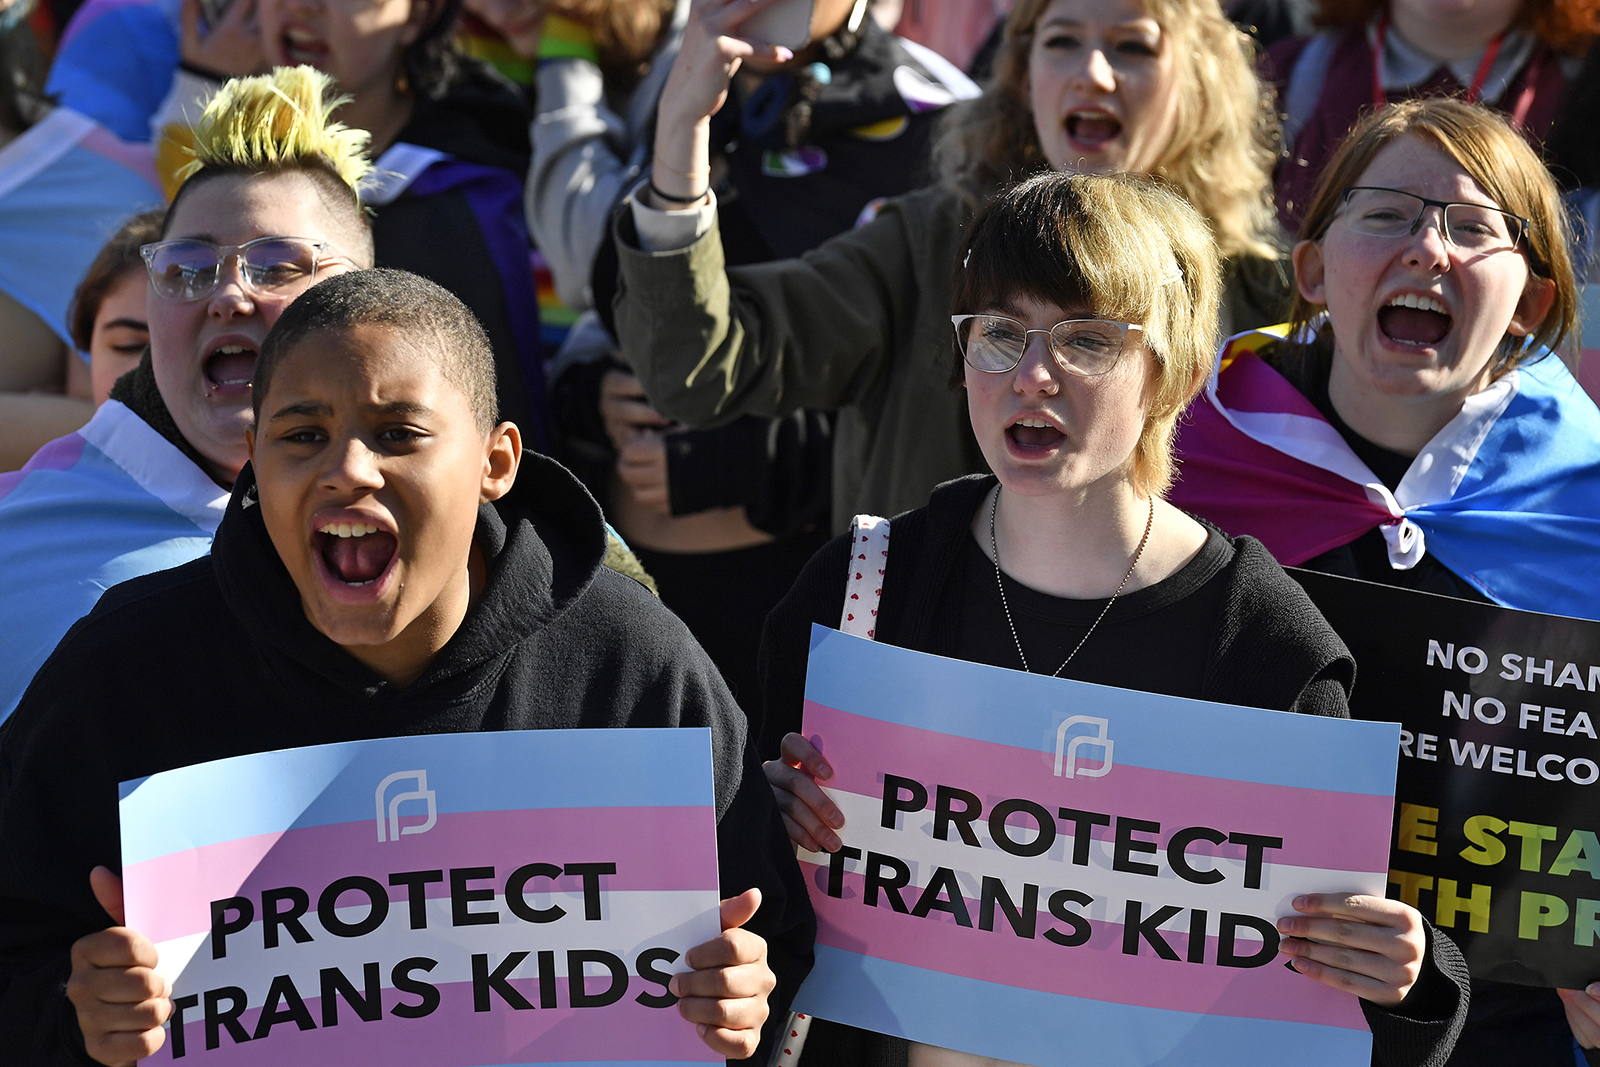 Protesters of Kentucky Senate bill SB150, known as the Transgender Health Bill, cheer on speakers during a rally on the lawn of the Kentucky State Capitol in Frankfort, Ky., Wednesday, March 29, 2023. (AP Photo/Timothy D. Easley)